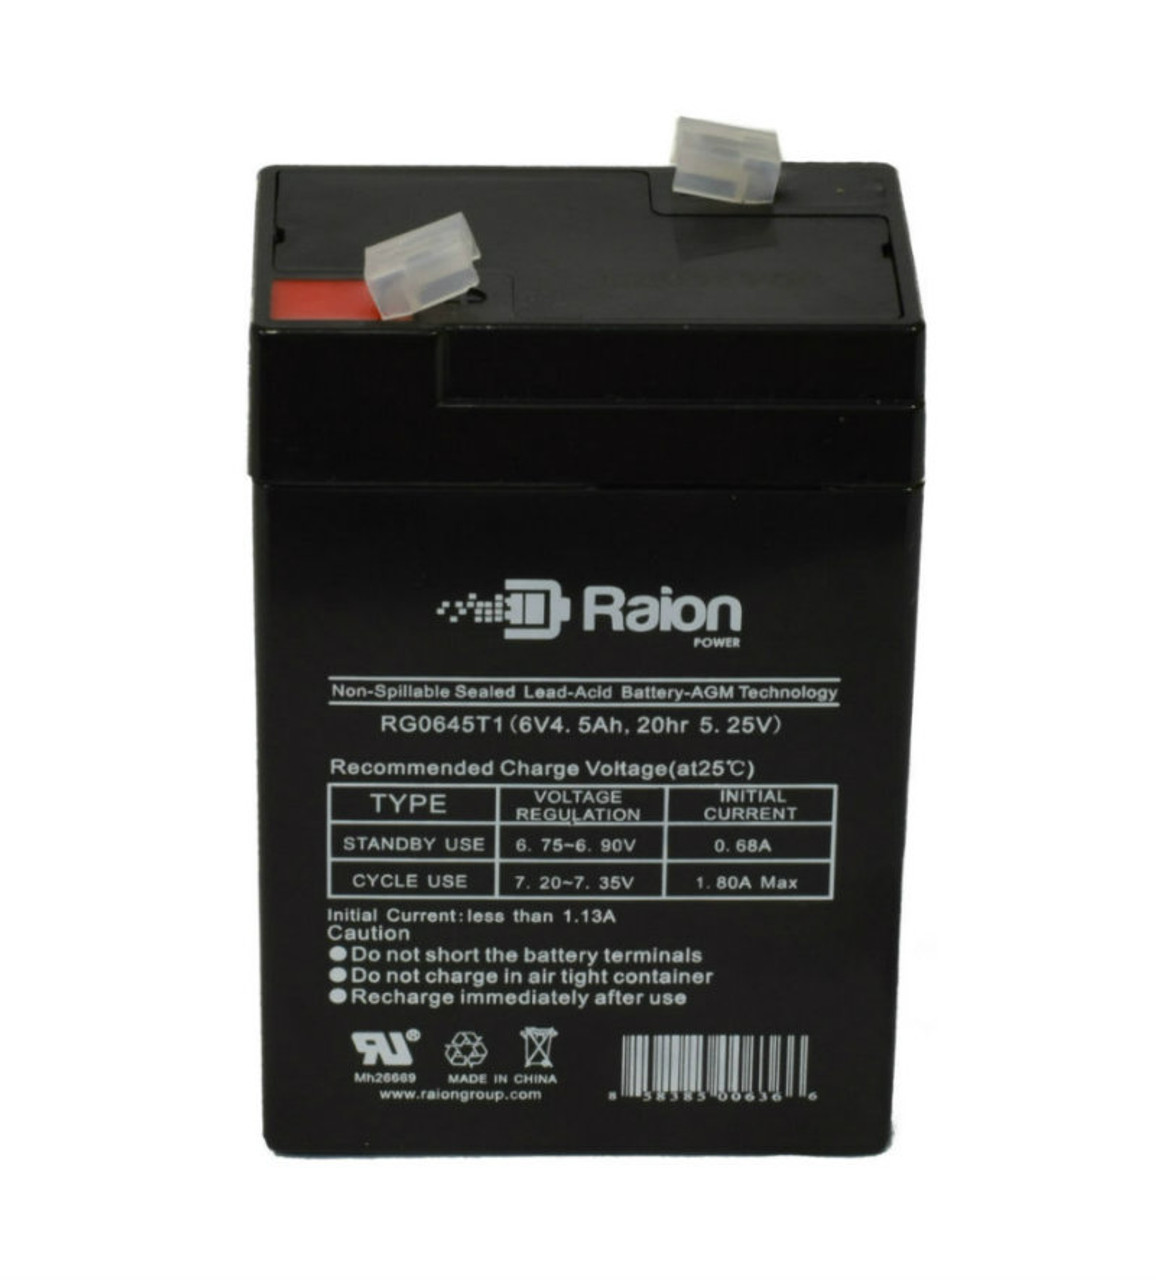 Raion Power RG0645T1 Replacement Battery Cartridge for Peg Perego IGED1171 6V Fiat 500 S